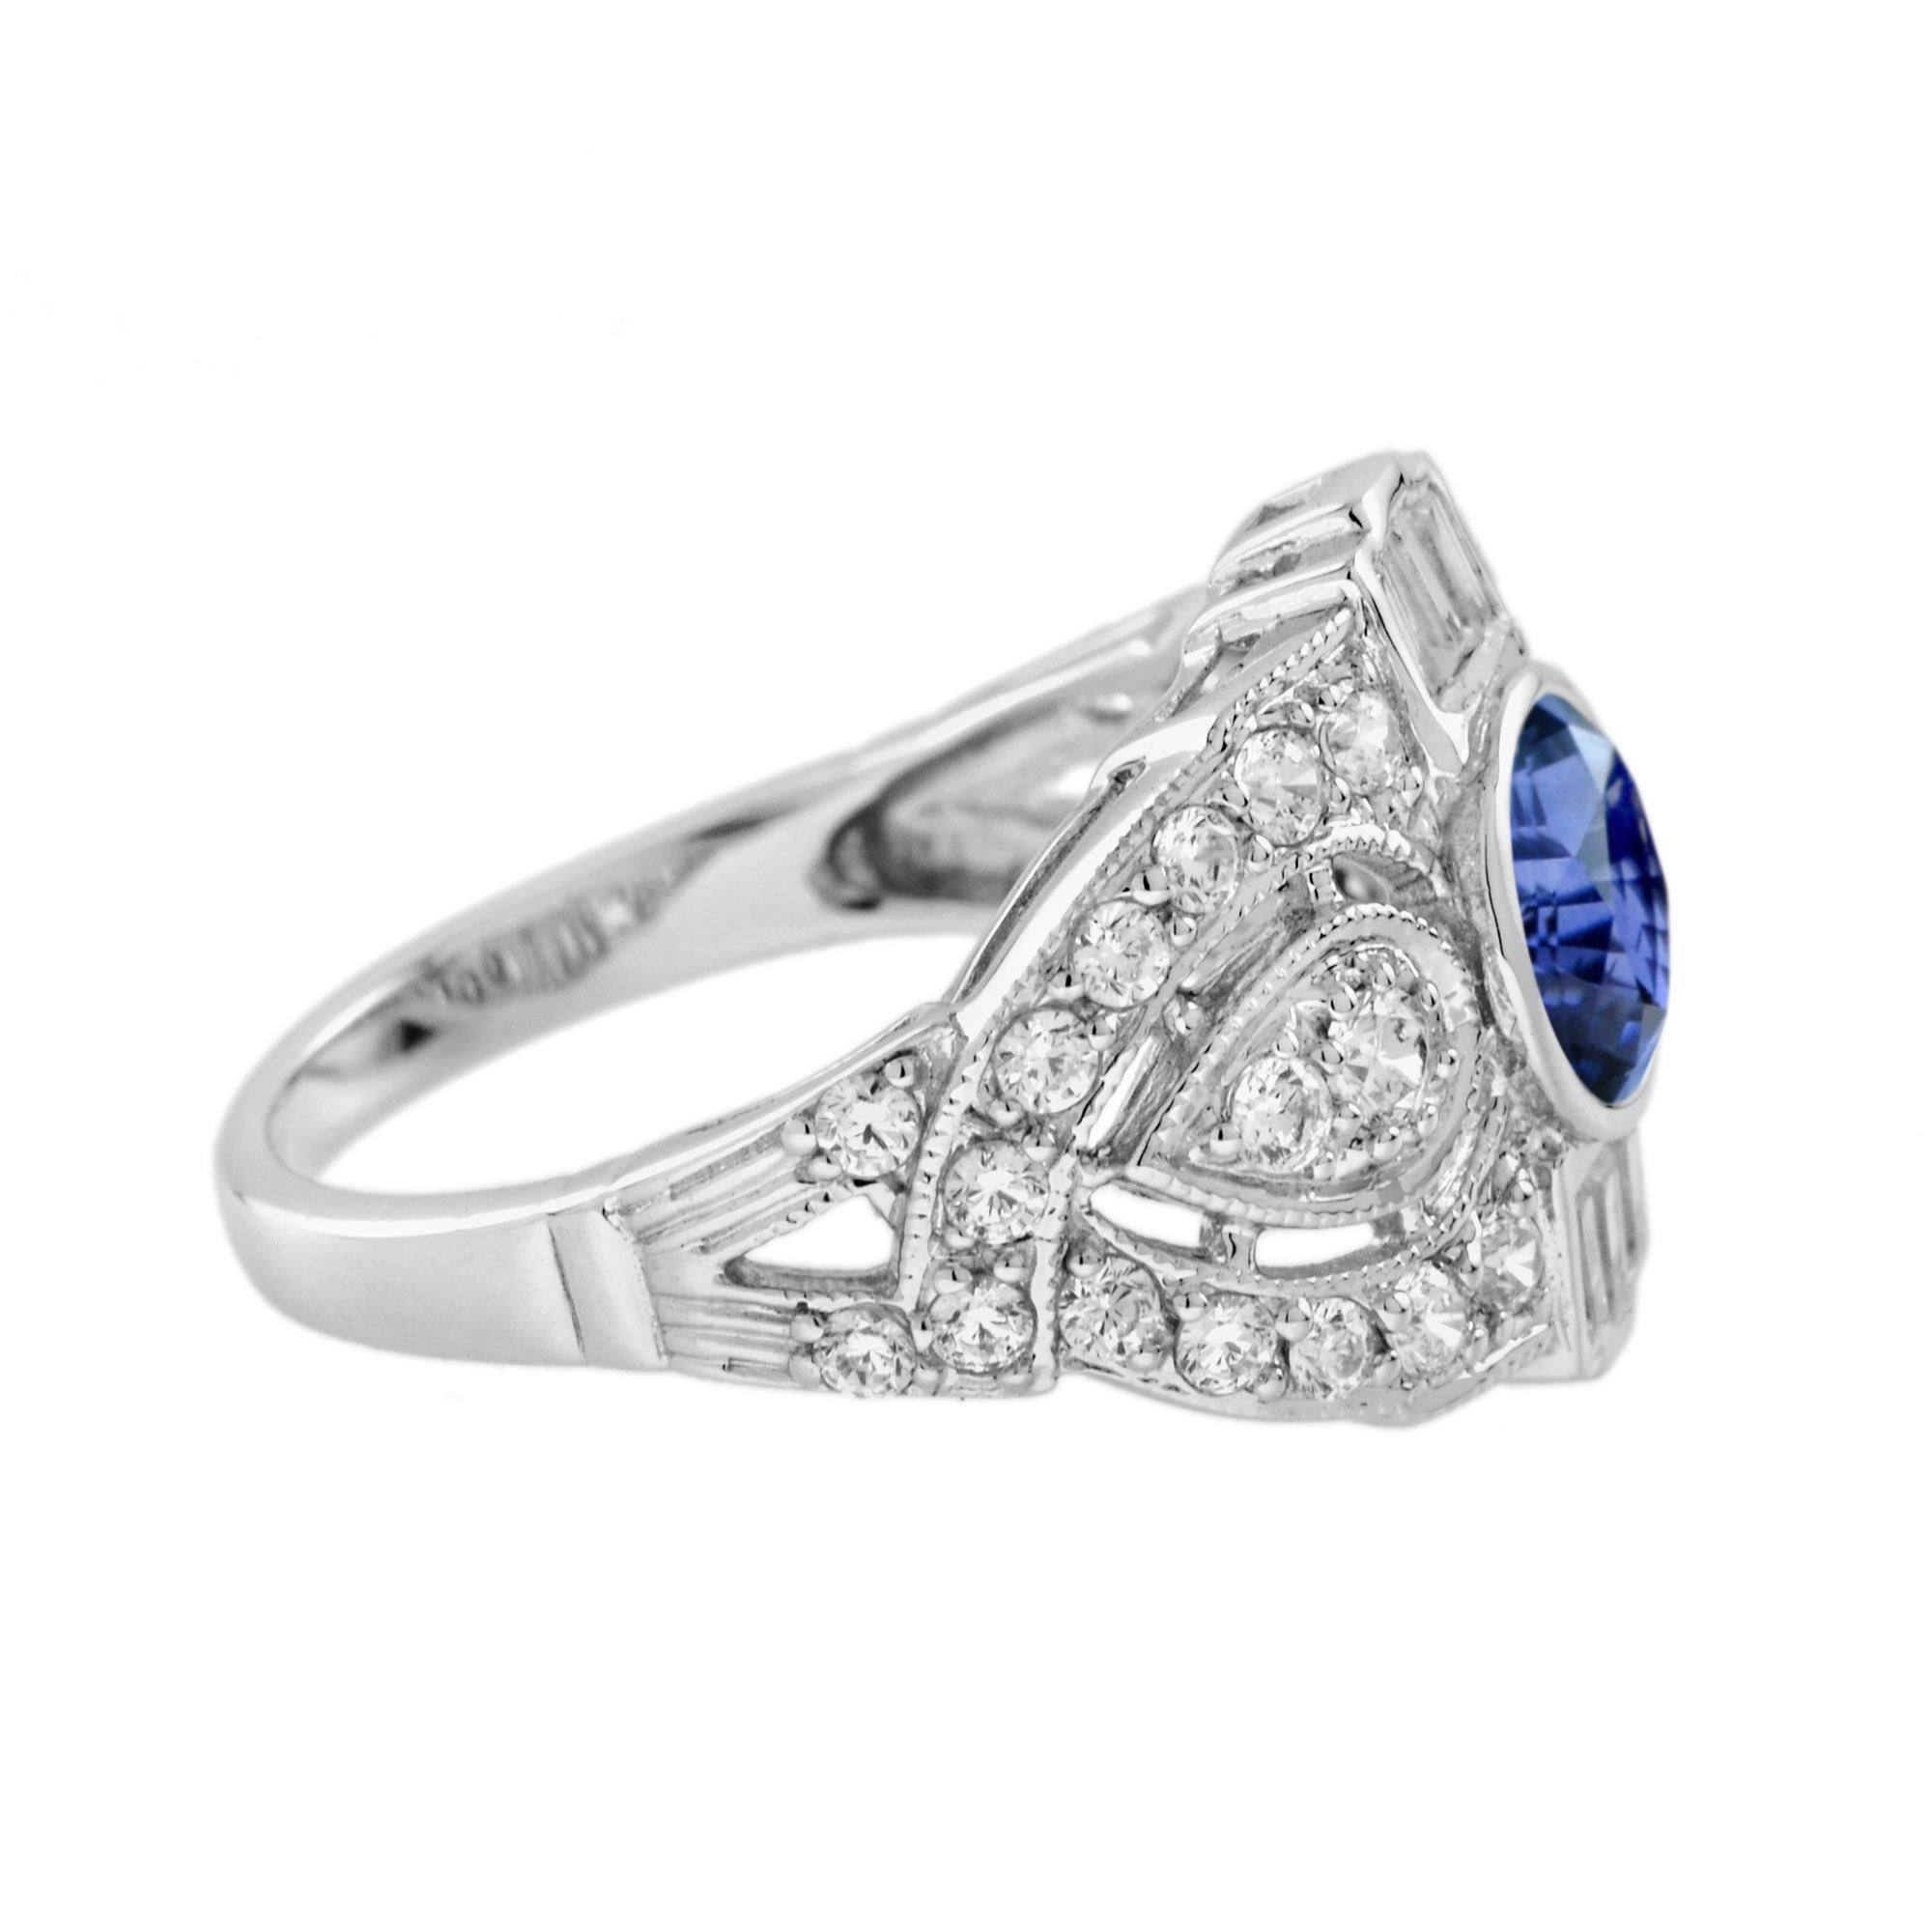 For Sale:  Ceylon Sapphire and Diamond Art Deco Style Engagement Ring in 18K White Gold 4